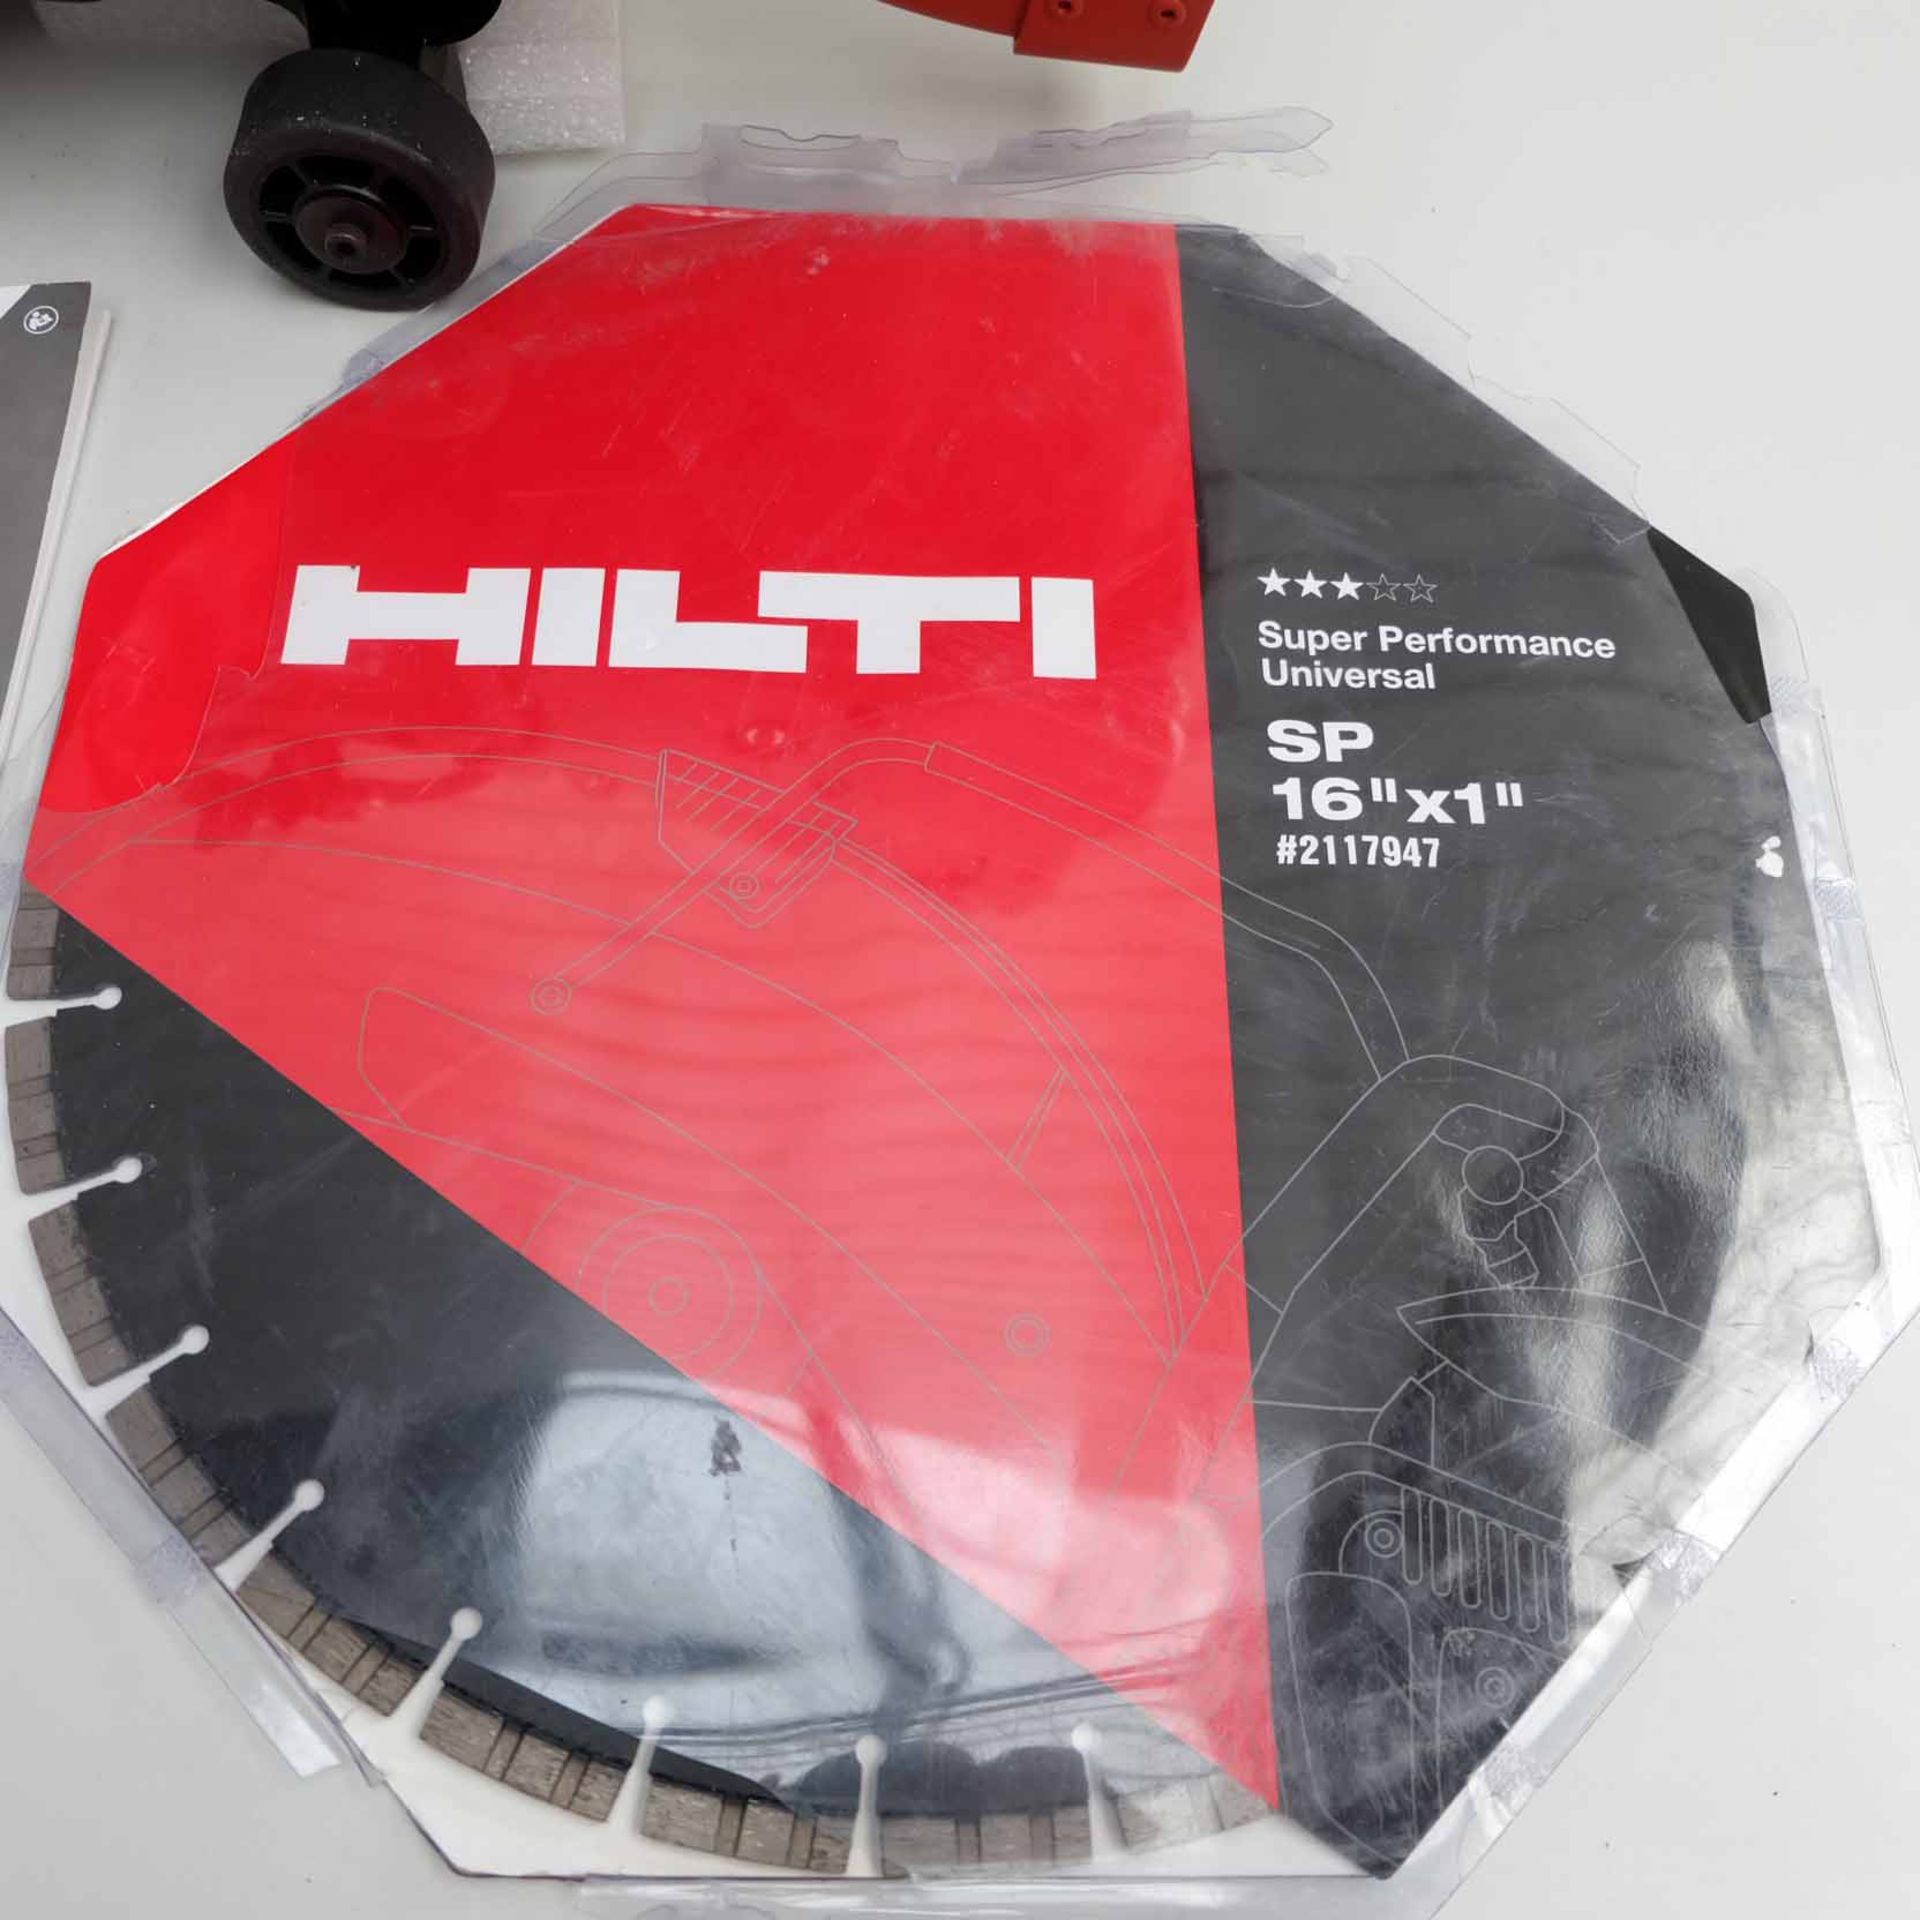 Hilti Hand Held Gas Saw. Model DSH 900-X 16". Complete With SP-16"x1" Blade. Easy Start Auto-Choke S - Image 14 of 22